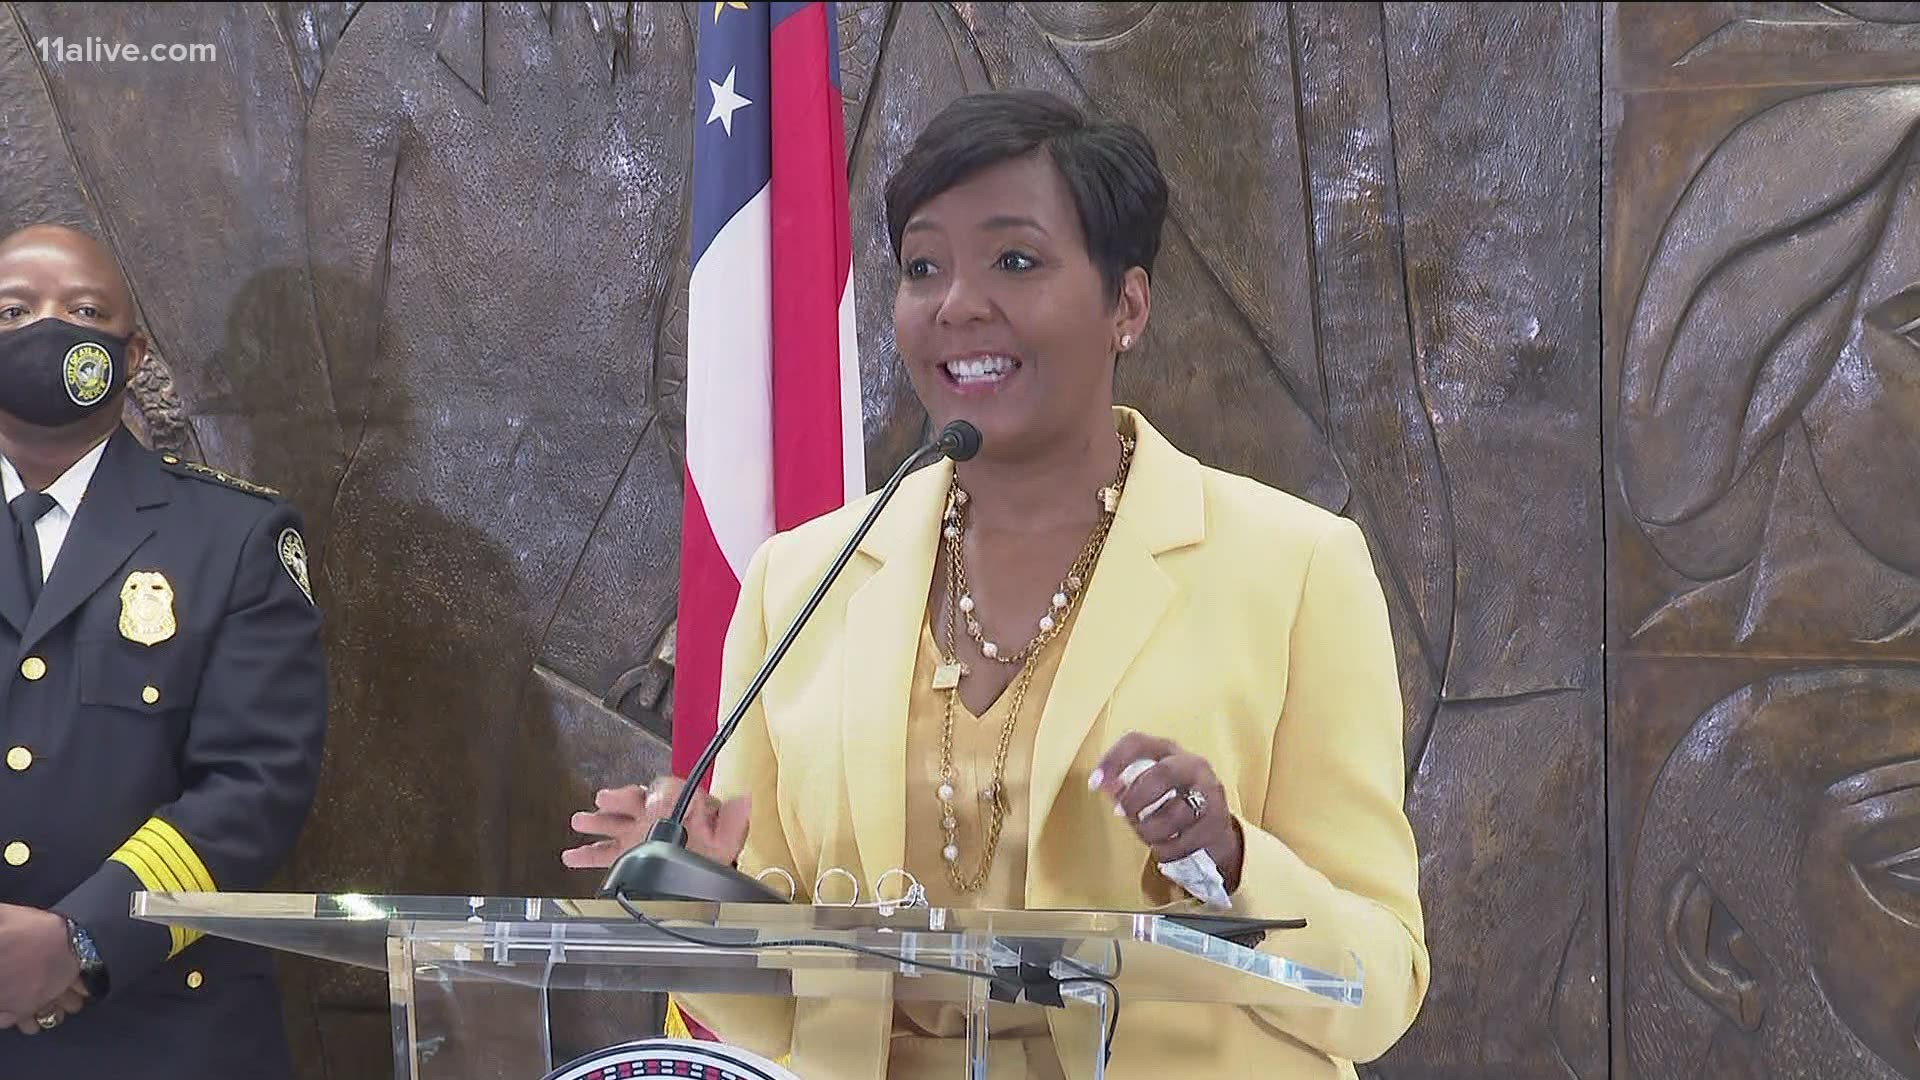 The mayor spoke about her decision to not seek re-election on Friday.